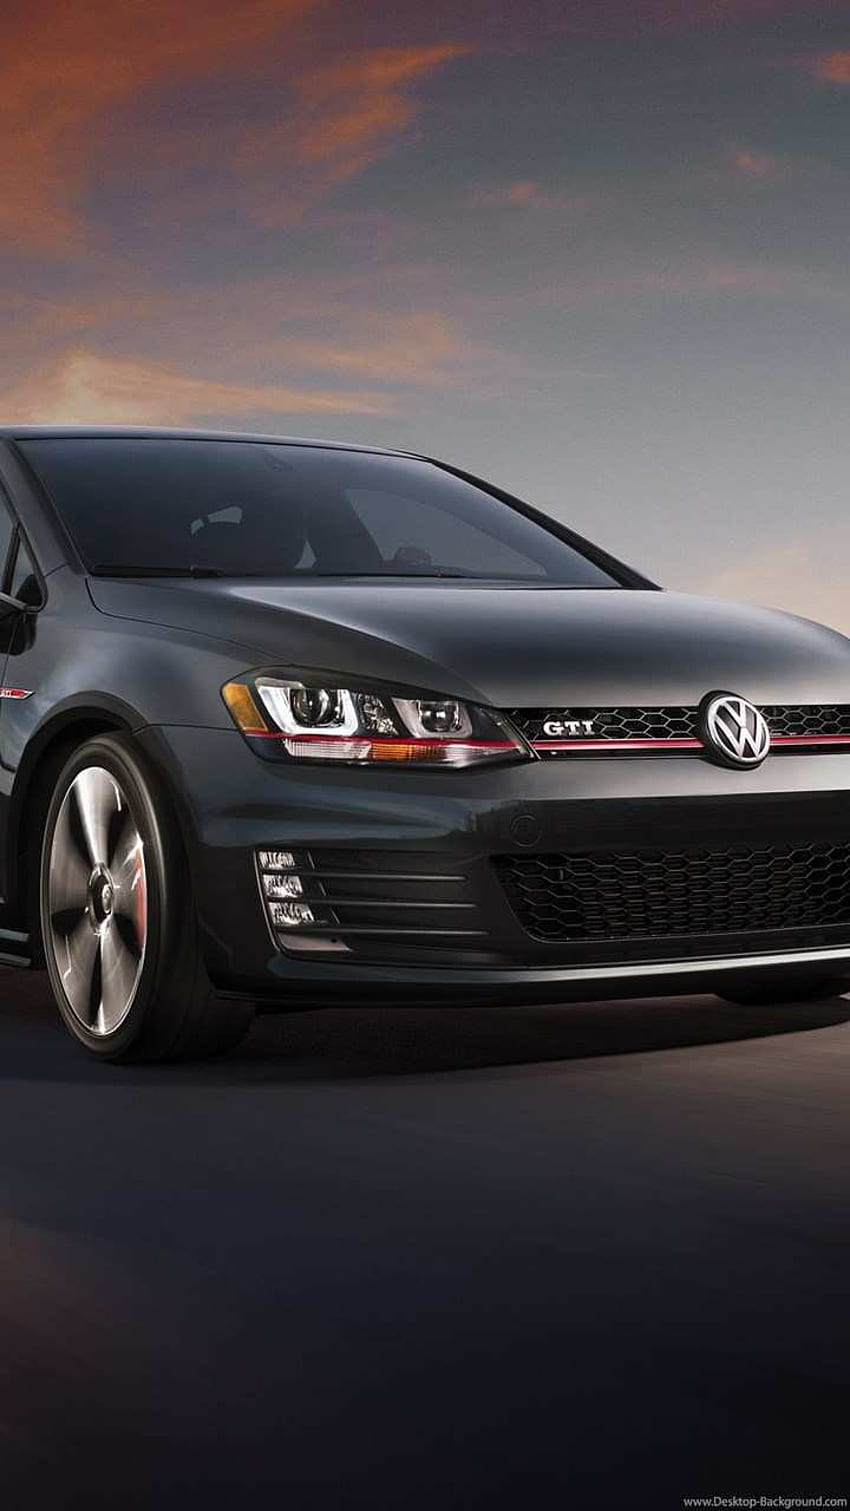 New VW Golf GTI and GTI Clubsport: the CAR debrief